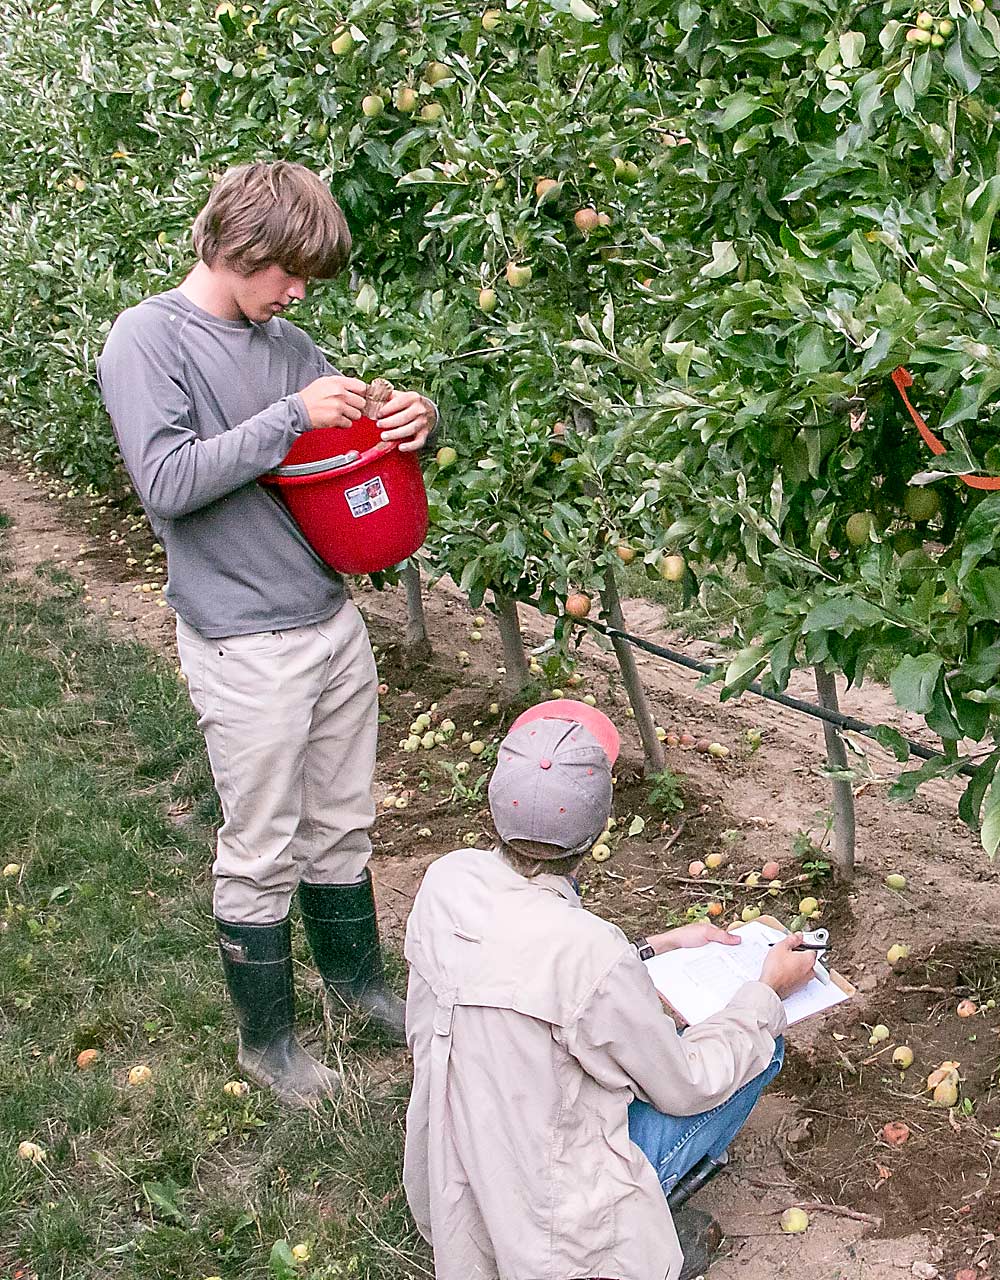 Robert Orpet of WSU, kneeling, takes notes while his research assistant, Sam Martin, counts earwigs during the 2016 trial. (Ross Courtney/Good Fruit Grower)